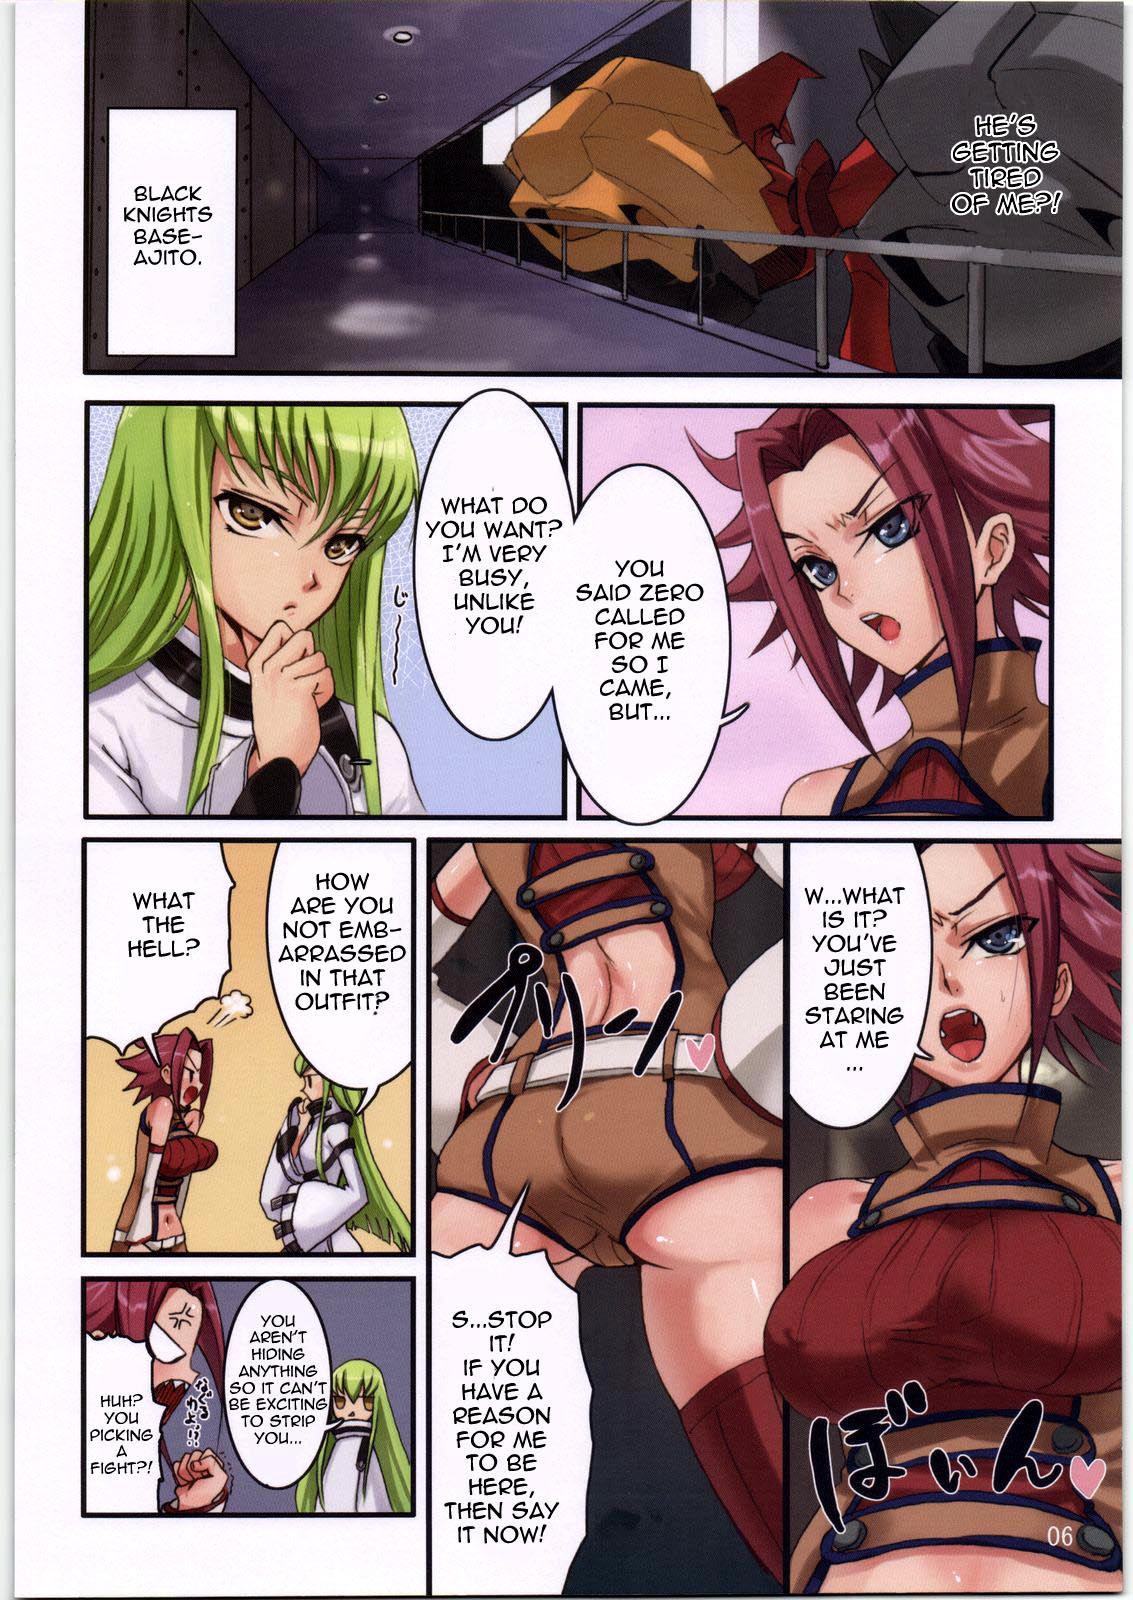 Eurobabe Majo no Itazura | Mischievous Witch - Code geass Picked Up - Page 6